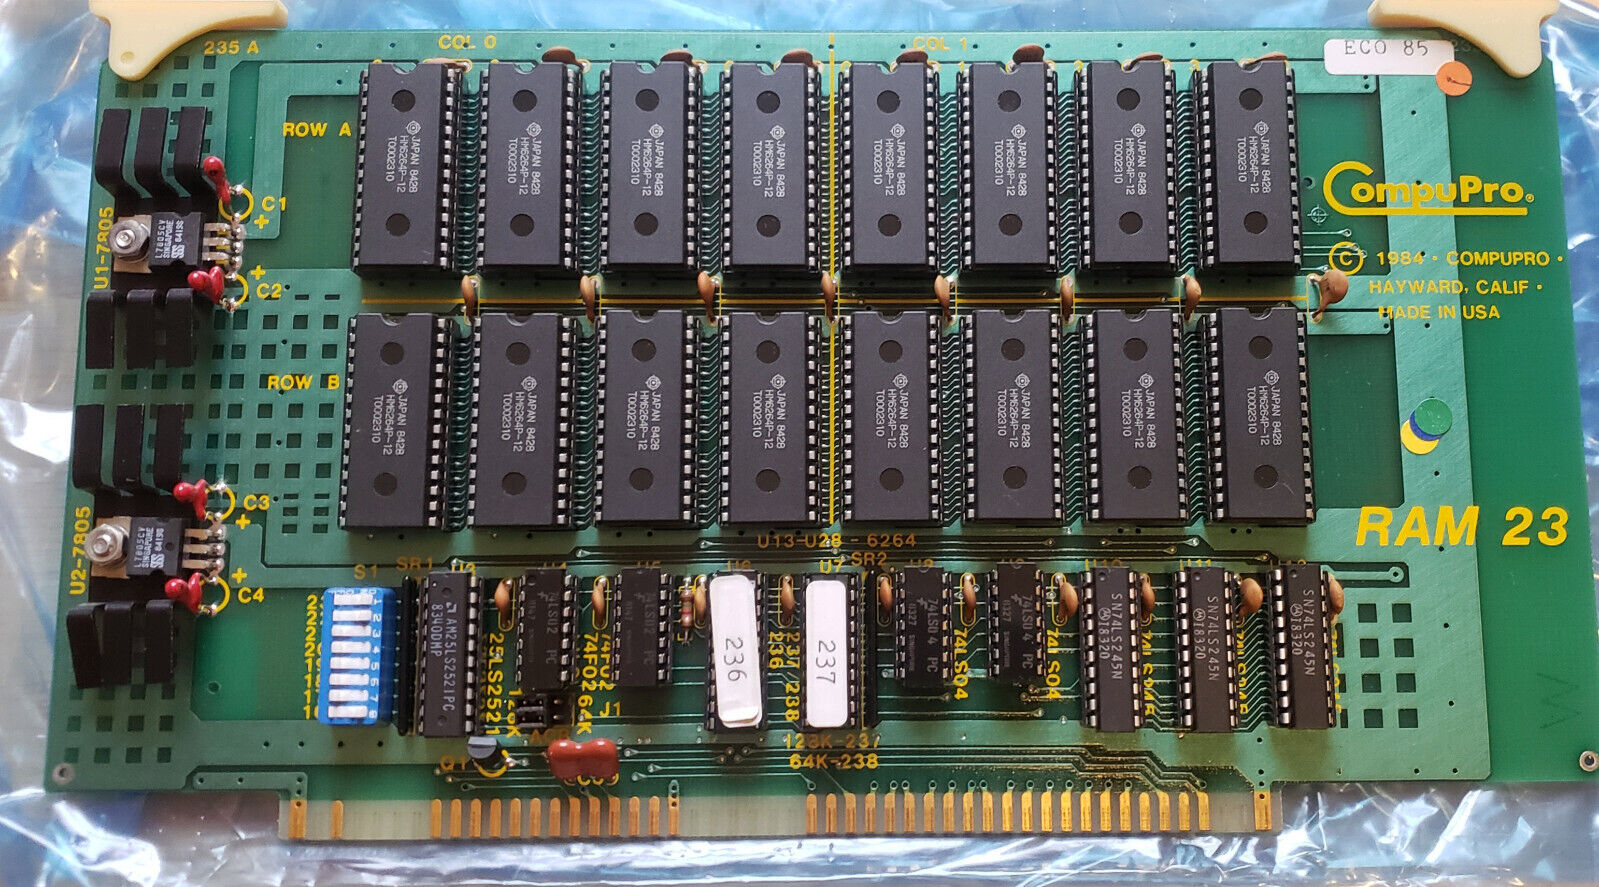 S-100 Compupro RAM 23 Memory Board. Pulled from a working system. User Manual.